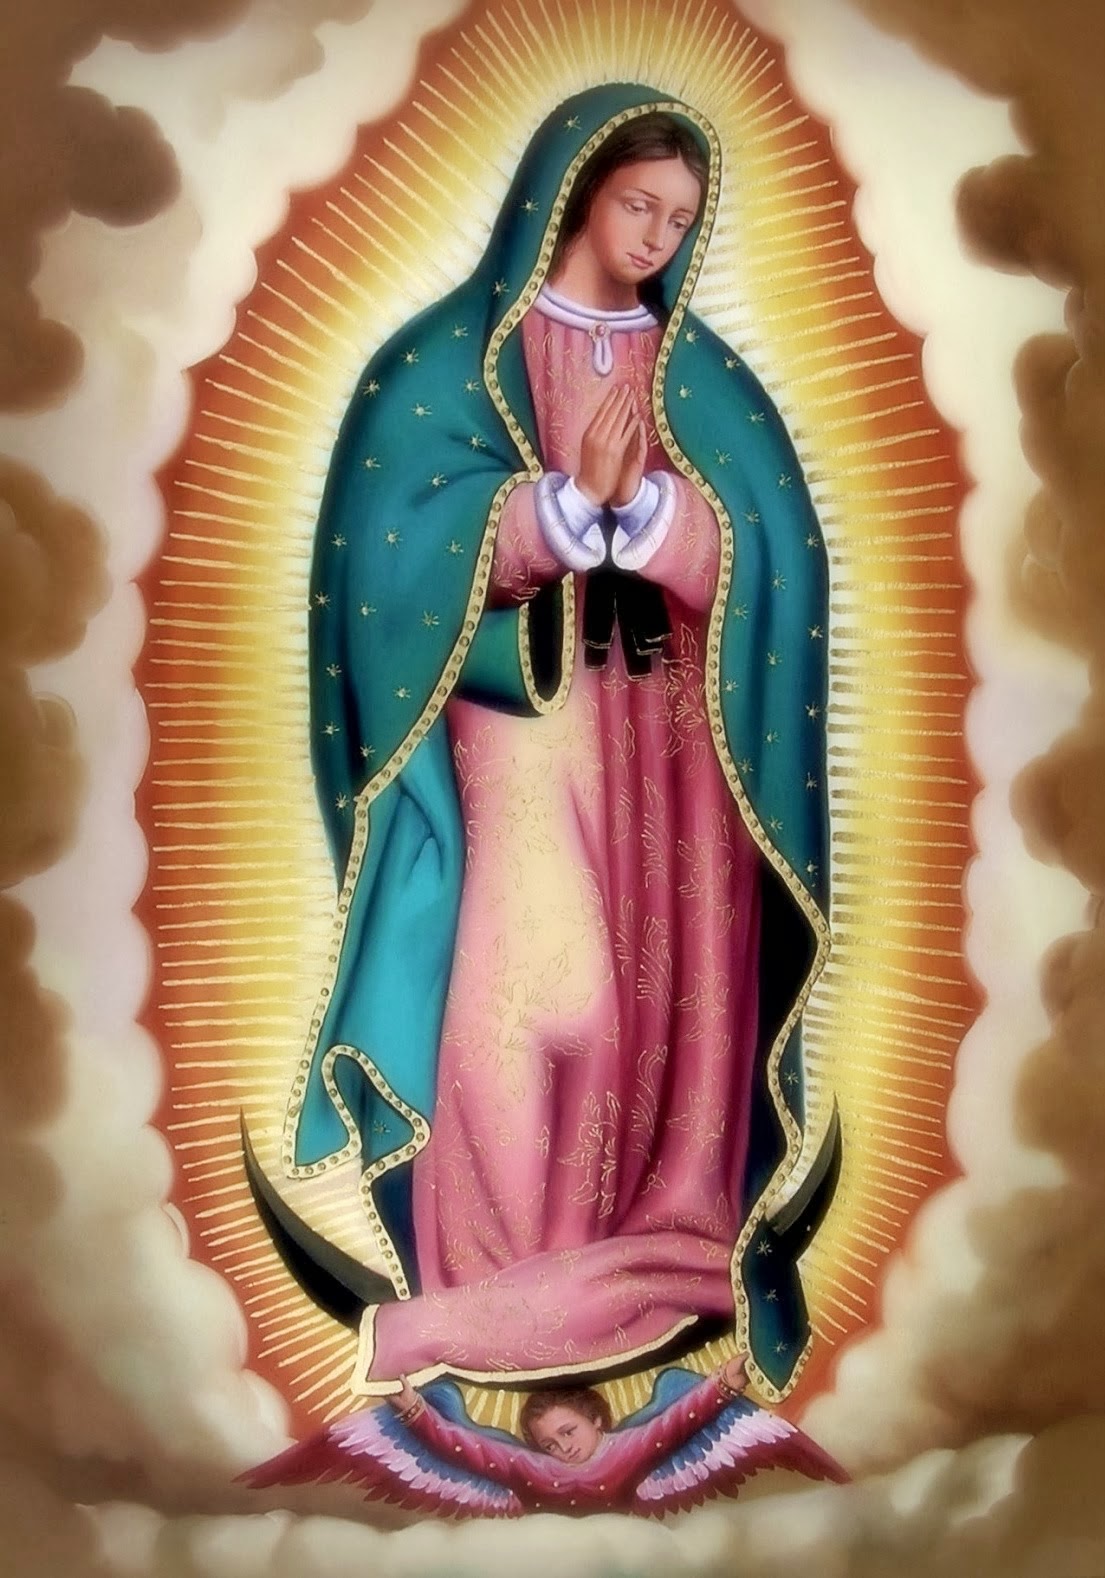 N S Guadalupe